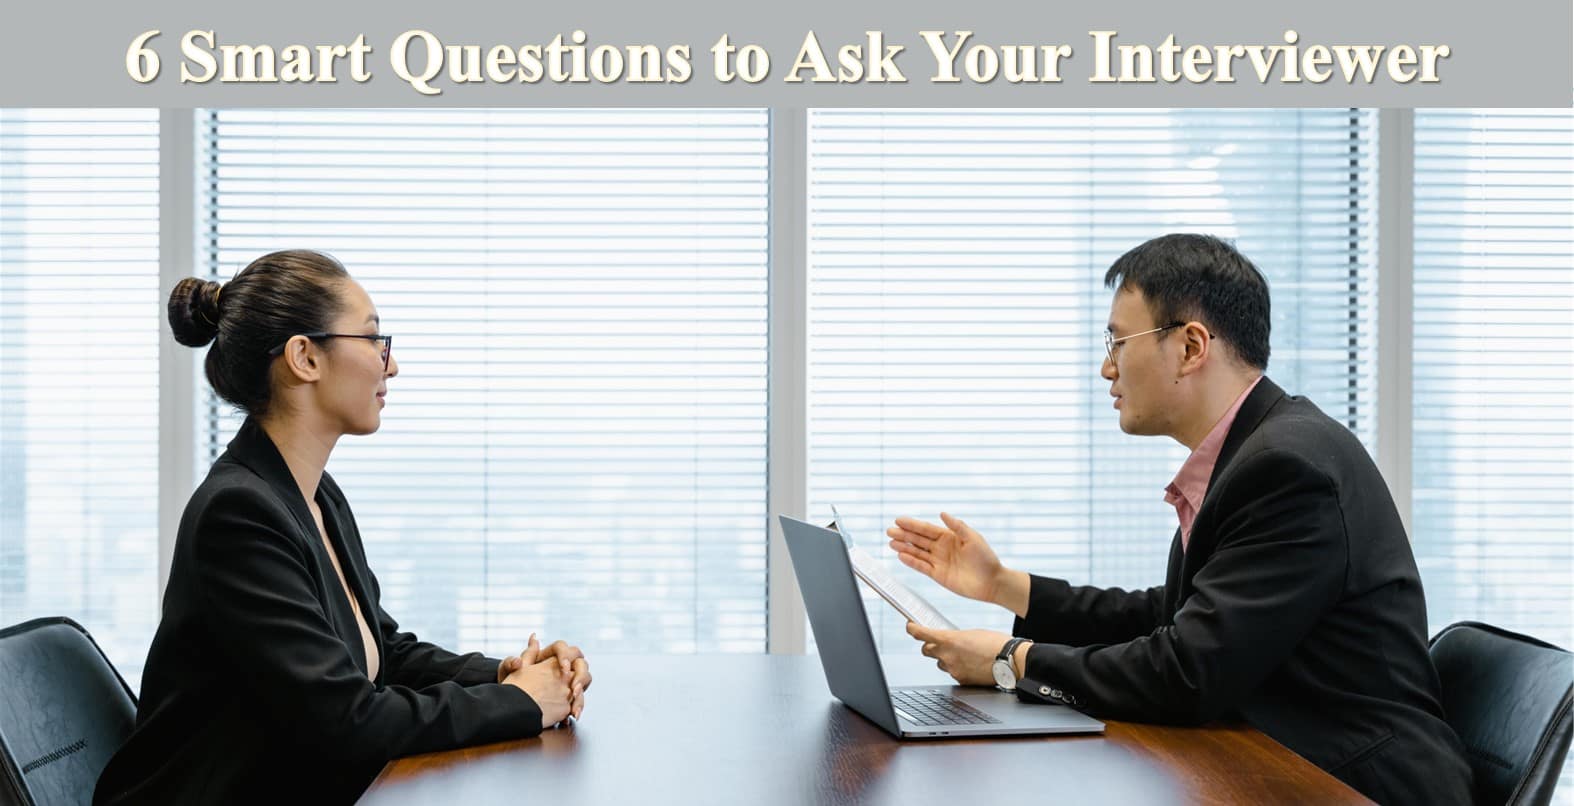 6 Smart Questions to Ask Your Interviewer